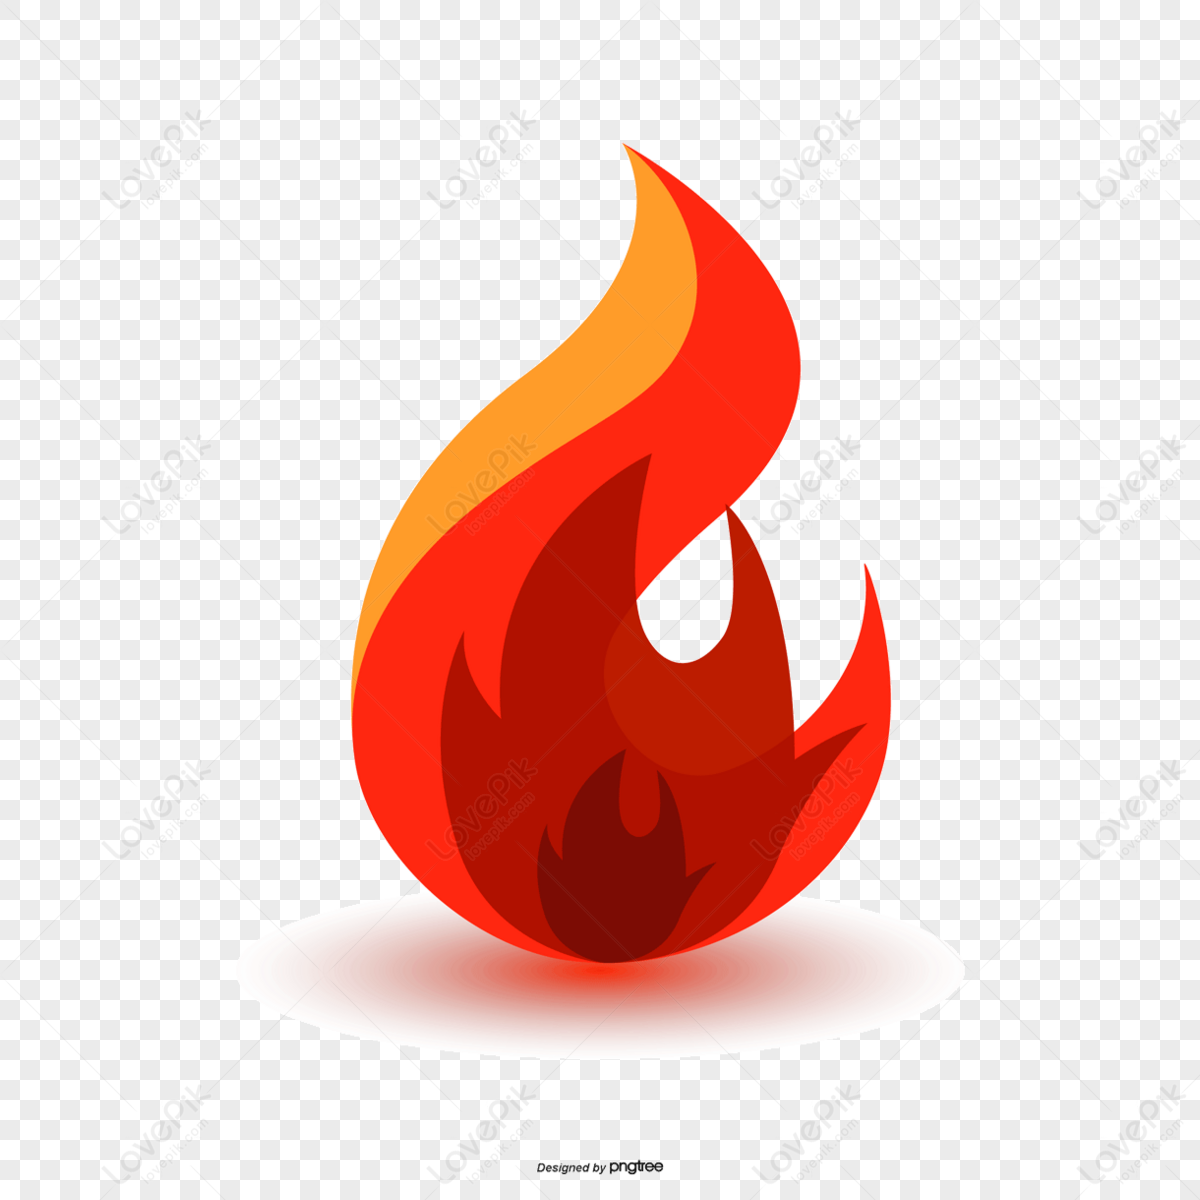 Free and customizable fire background templates